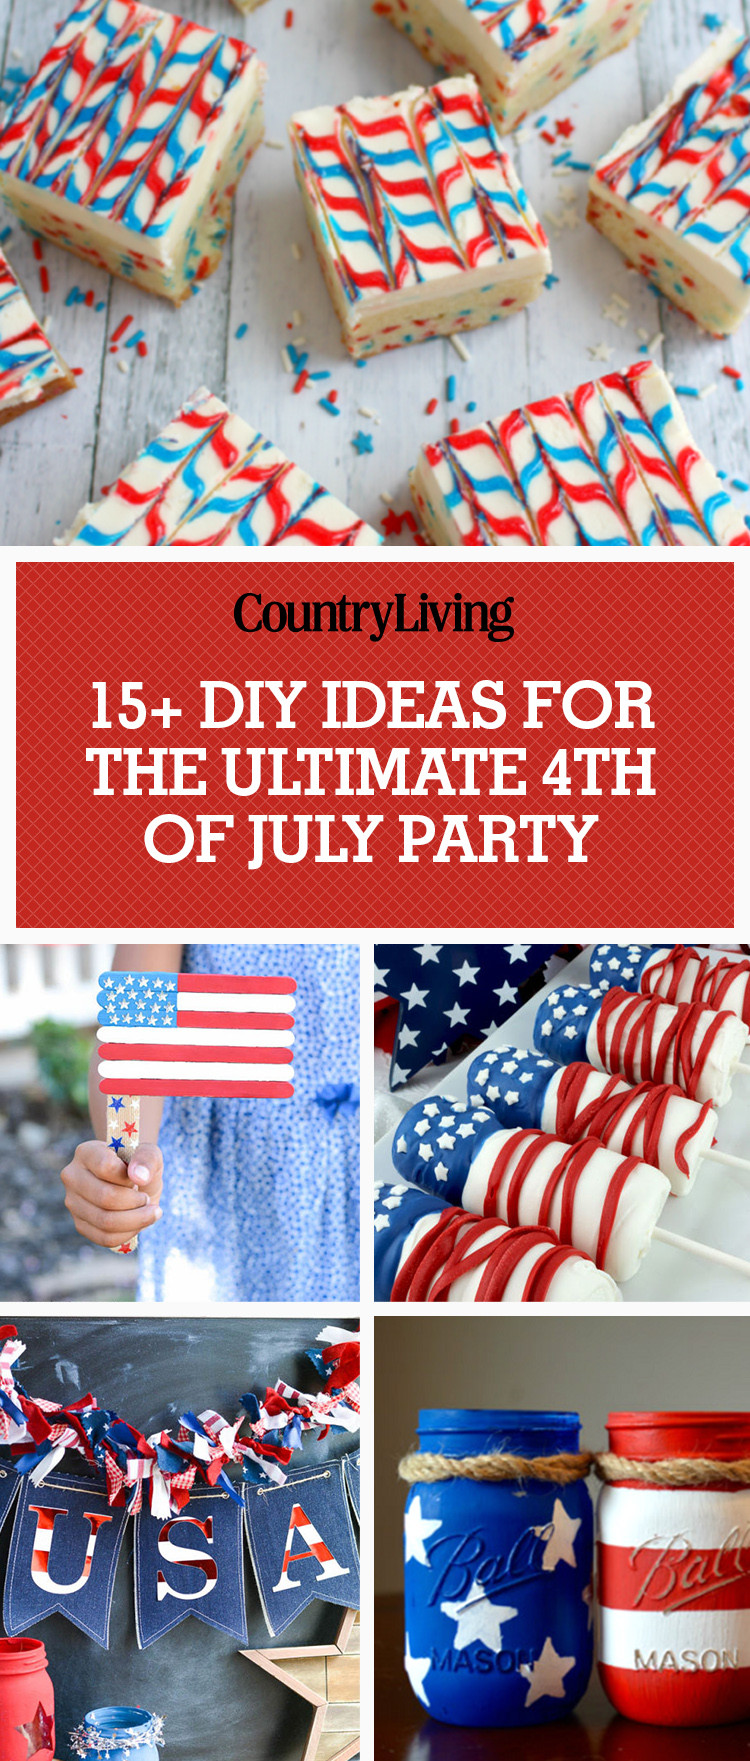 4th Of July Birthday Ideas
 16 Best 4th of July Party Ideas Games & DIY Decor for a